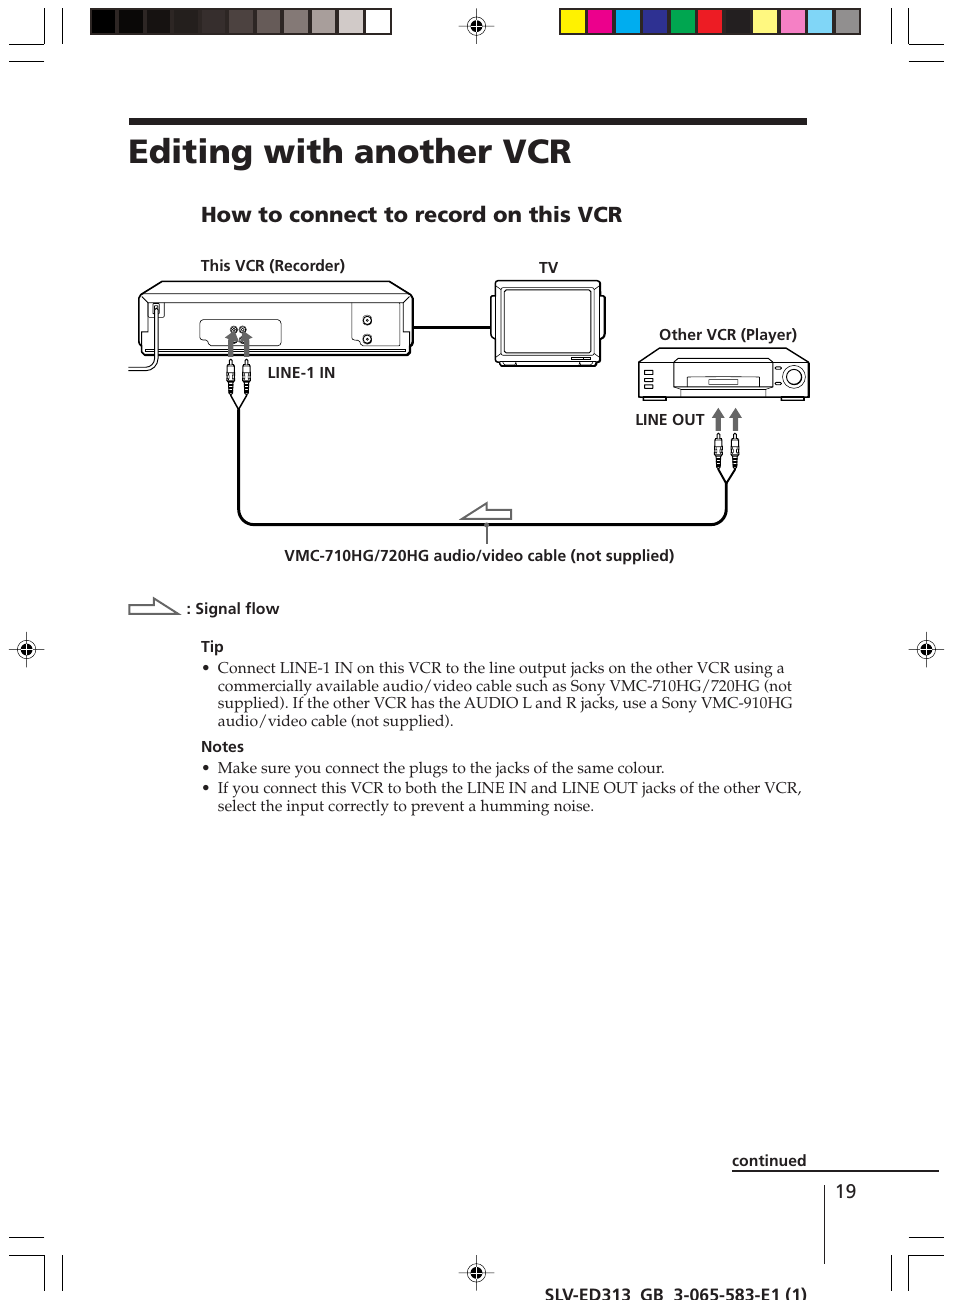 Editing with another vcr, How to connect to record on this vcr | Sony SLV-ED313 User Manual | Page 19 / 20